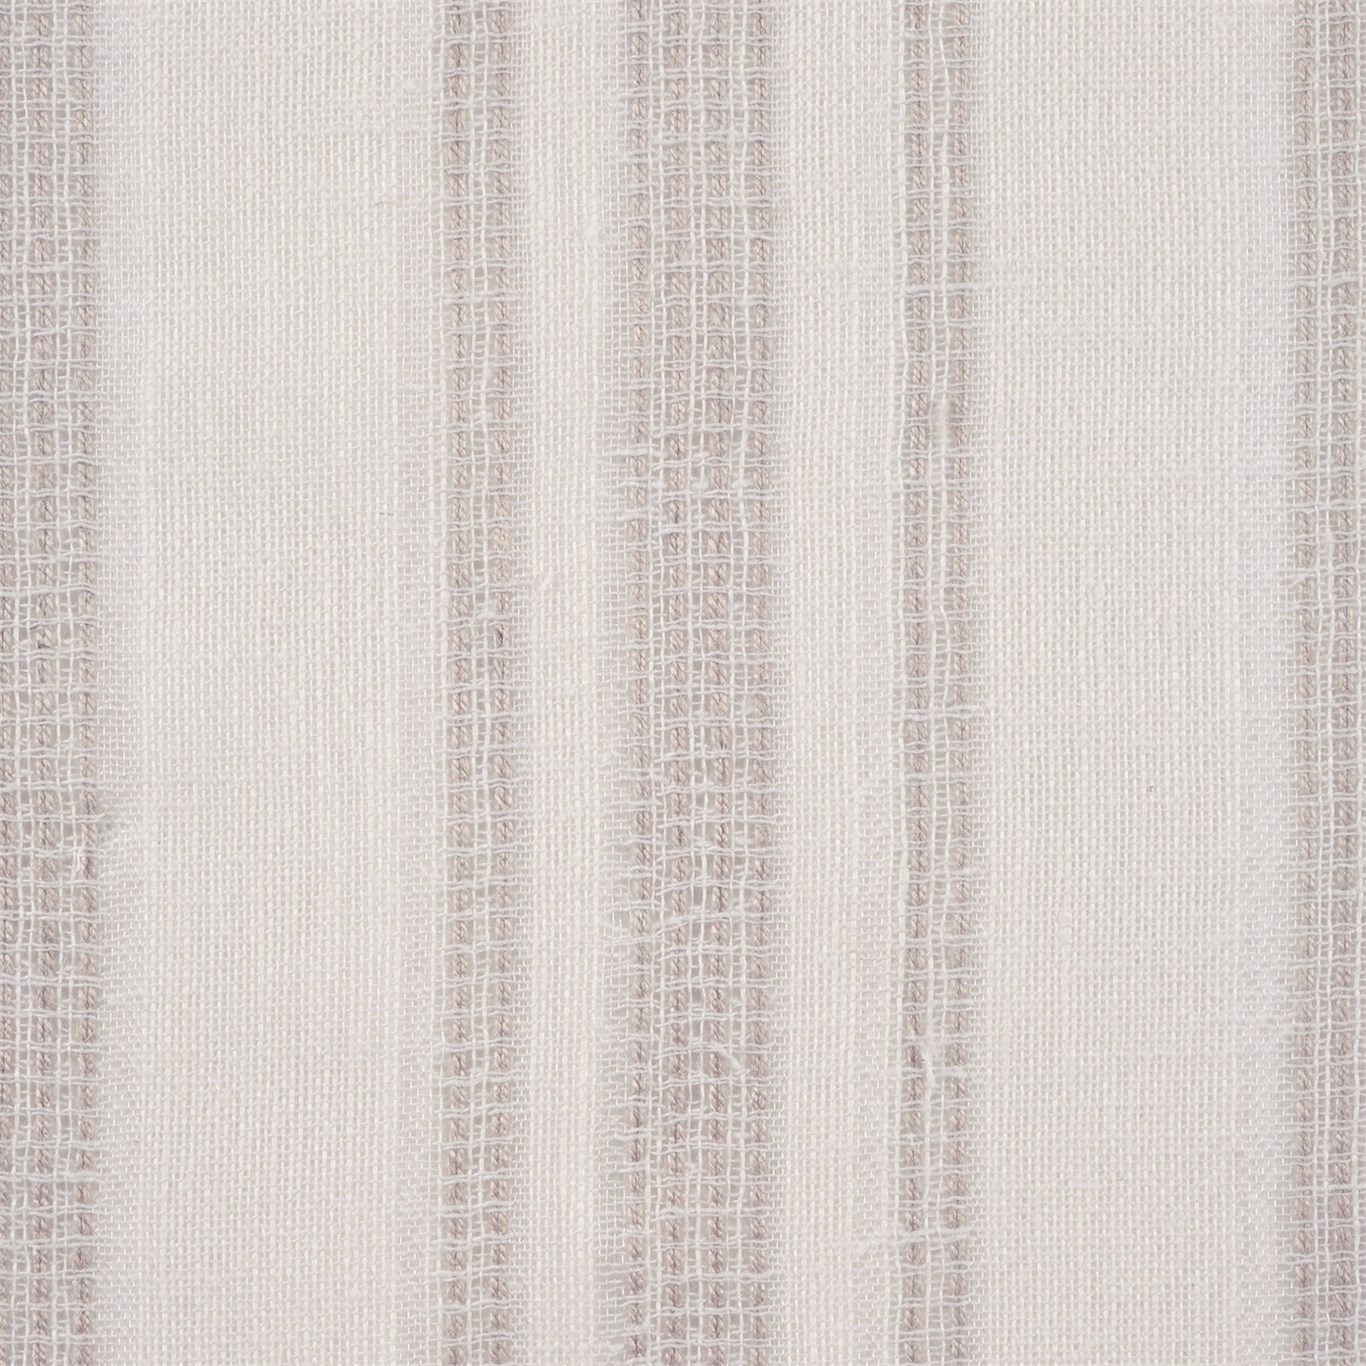 Purity Voiles Linen/Ivory Fabric by HAR